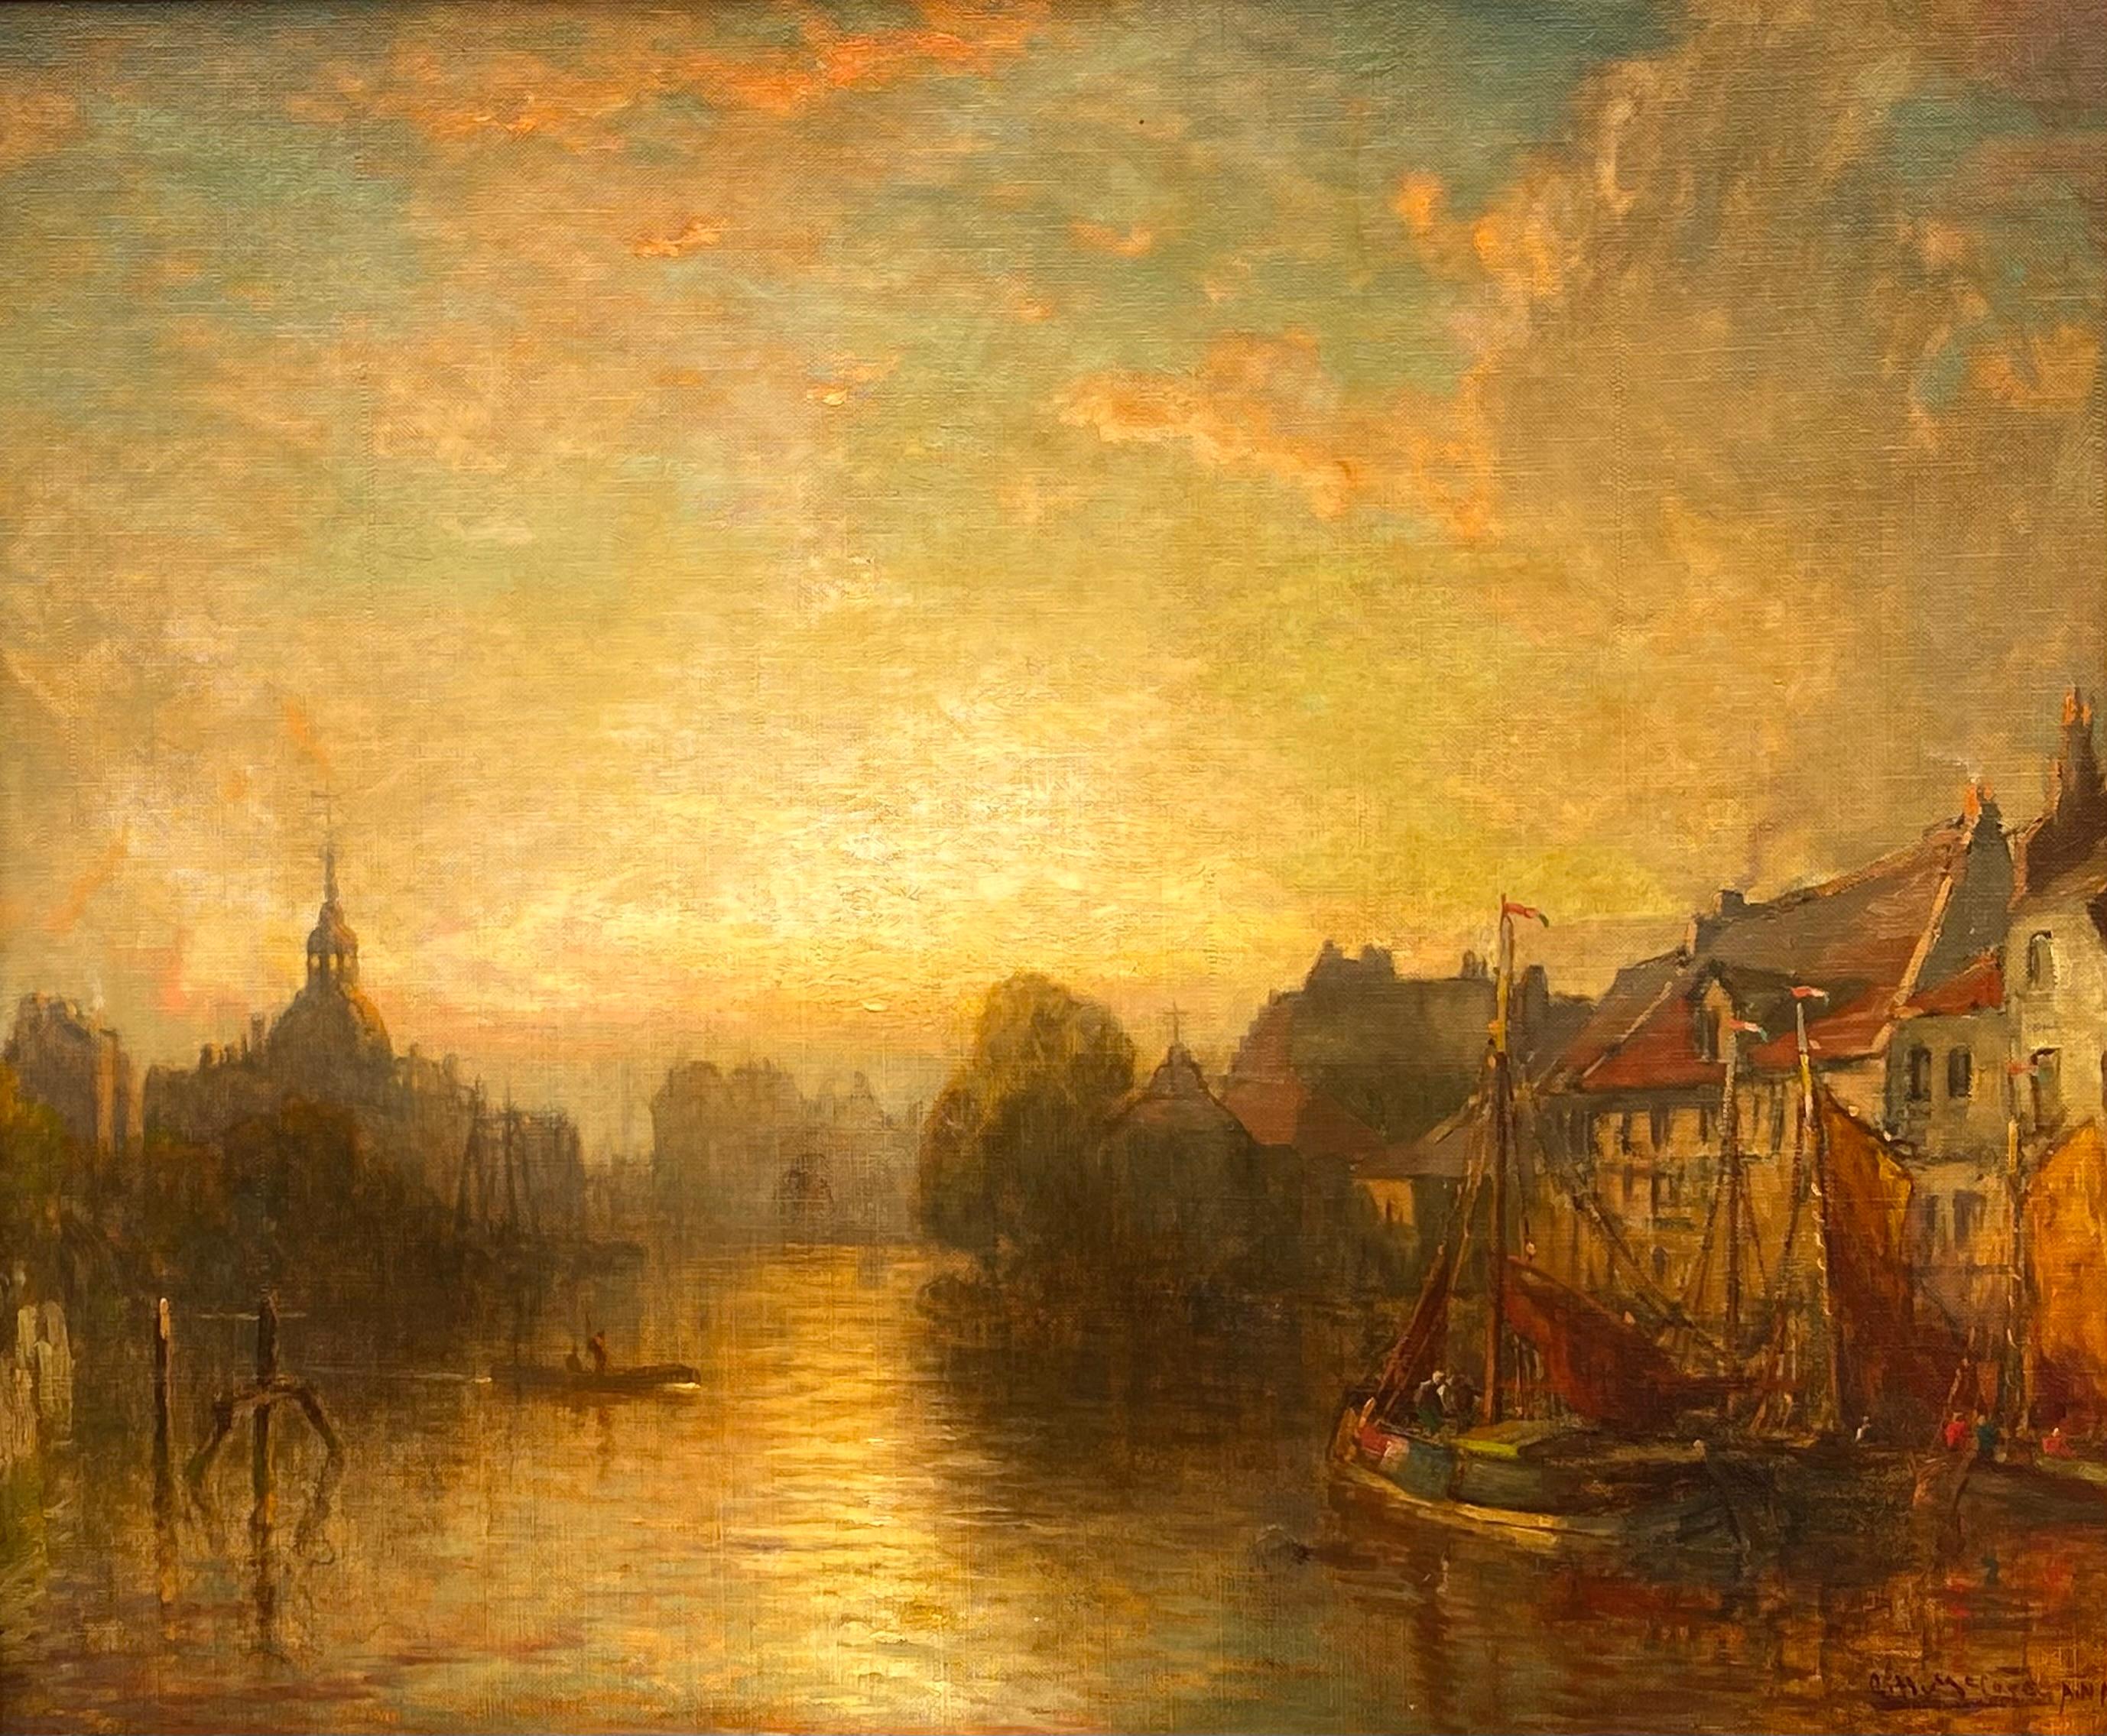 “Amsterdam Harbor at Sunset” - Painting by George McCord